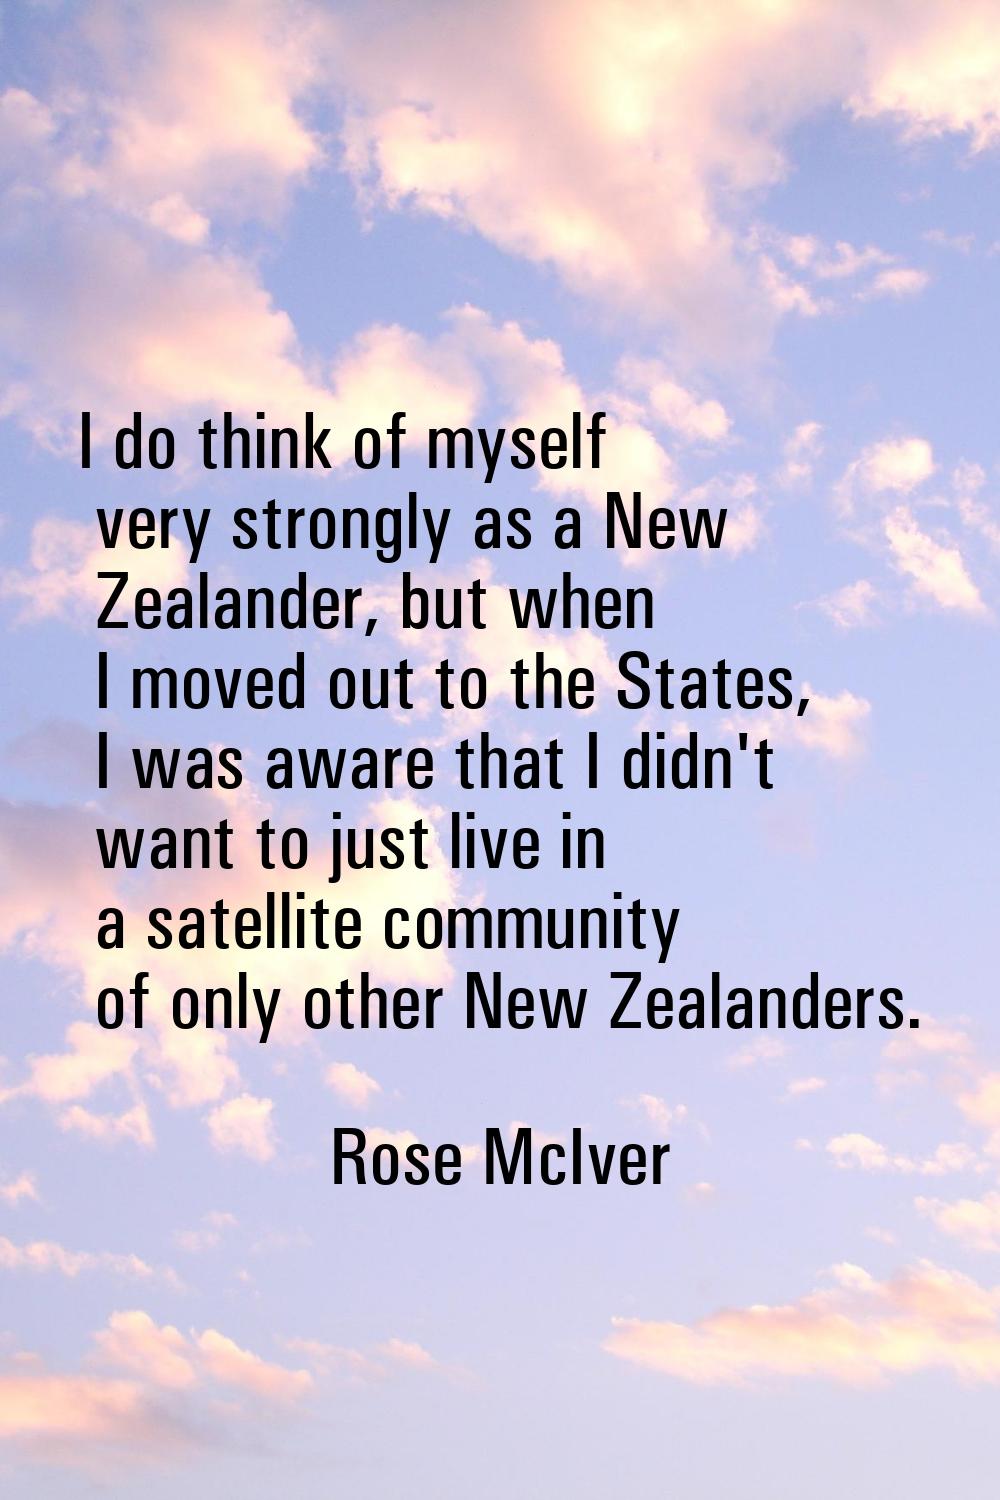 I do think of myself very strongly as a New Zealander, but when I moved out to the States, I was aw